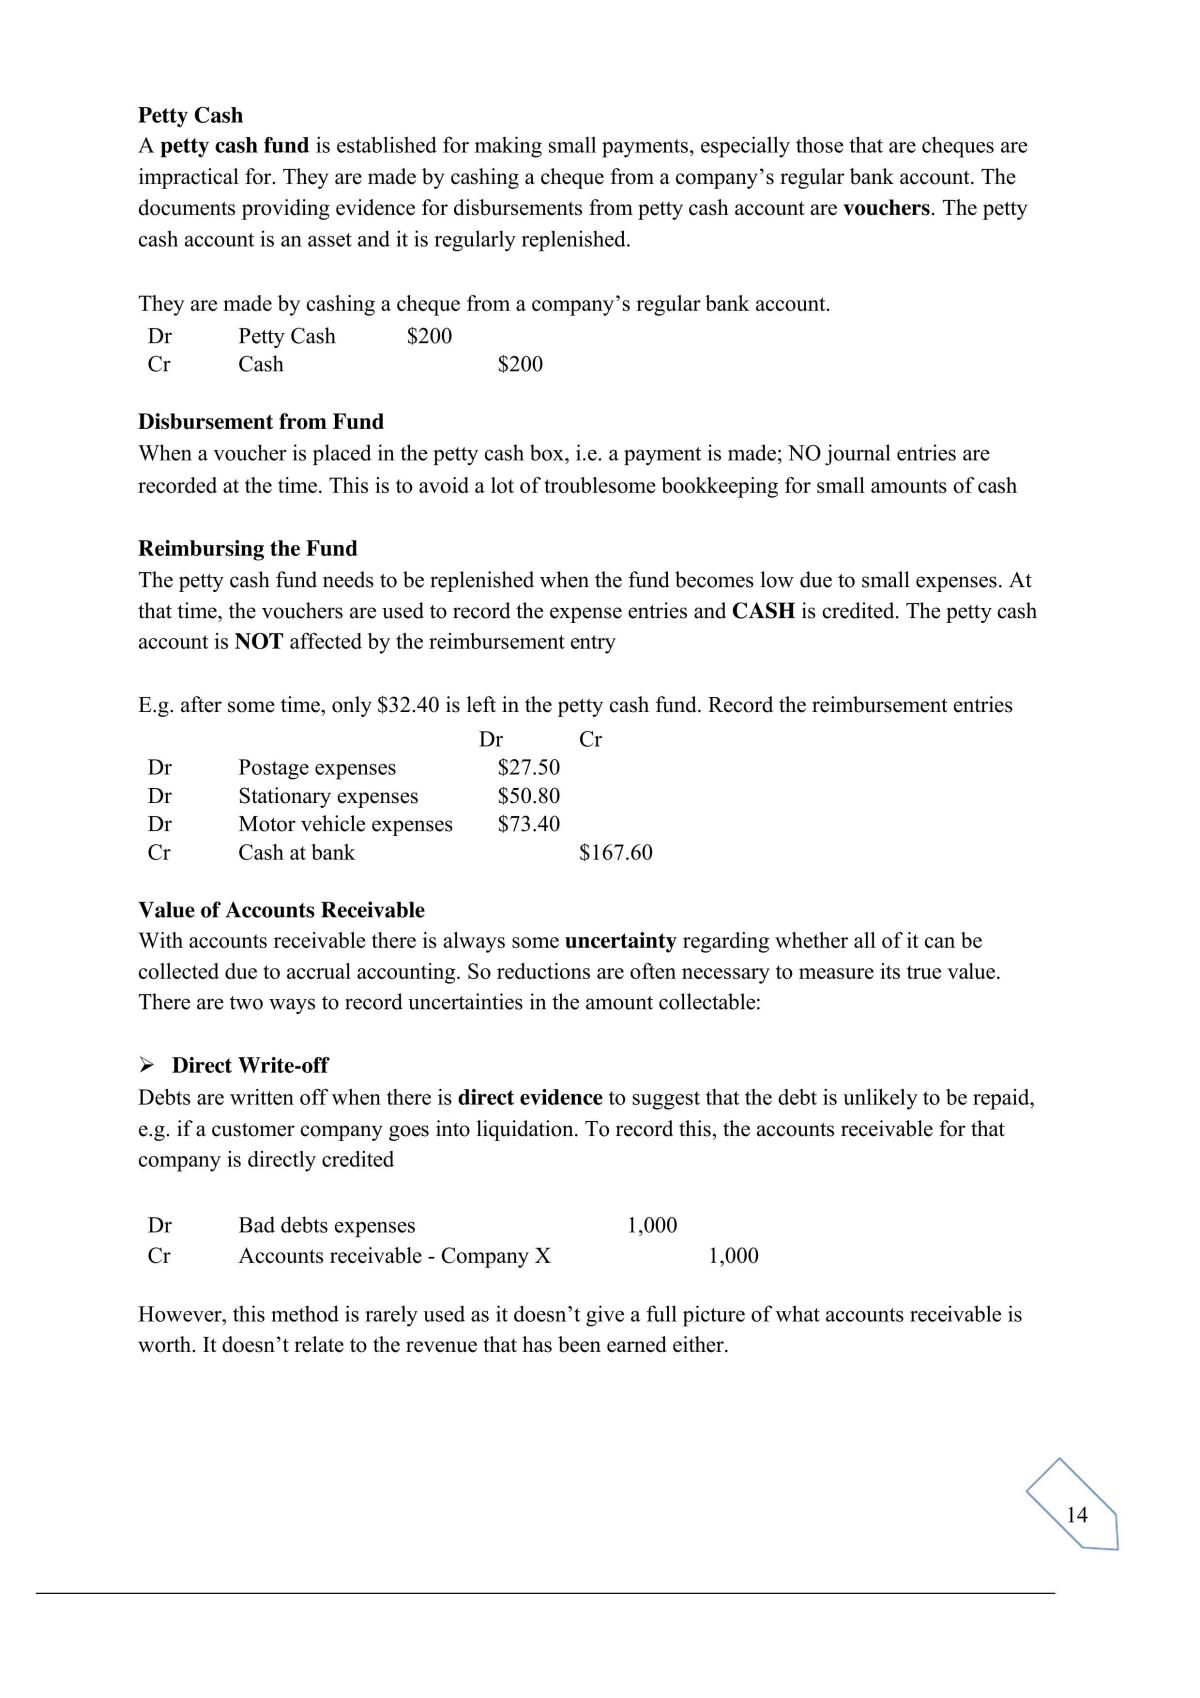 Introduction to Accounting and Finance Notes - Page 13